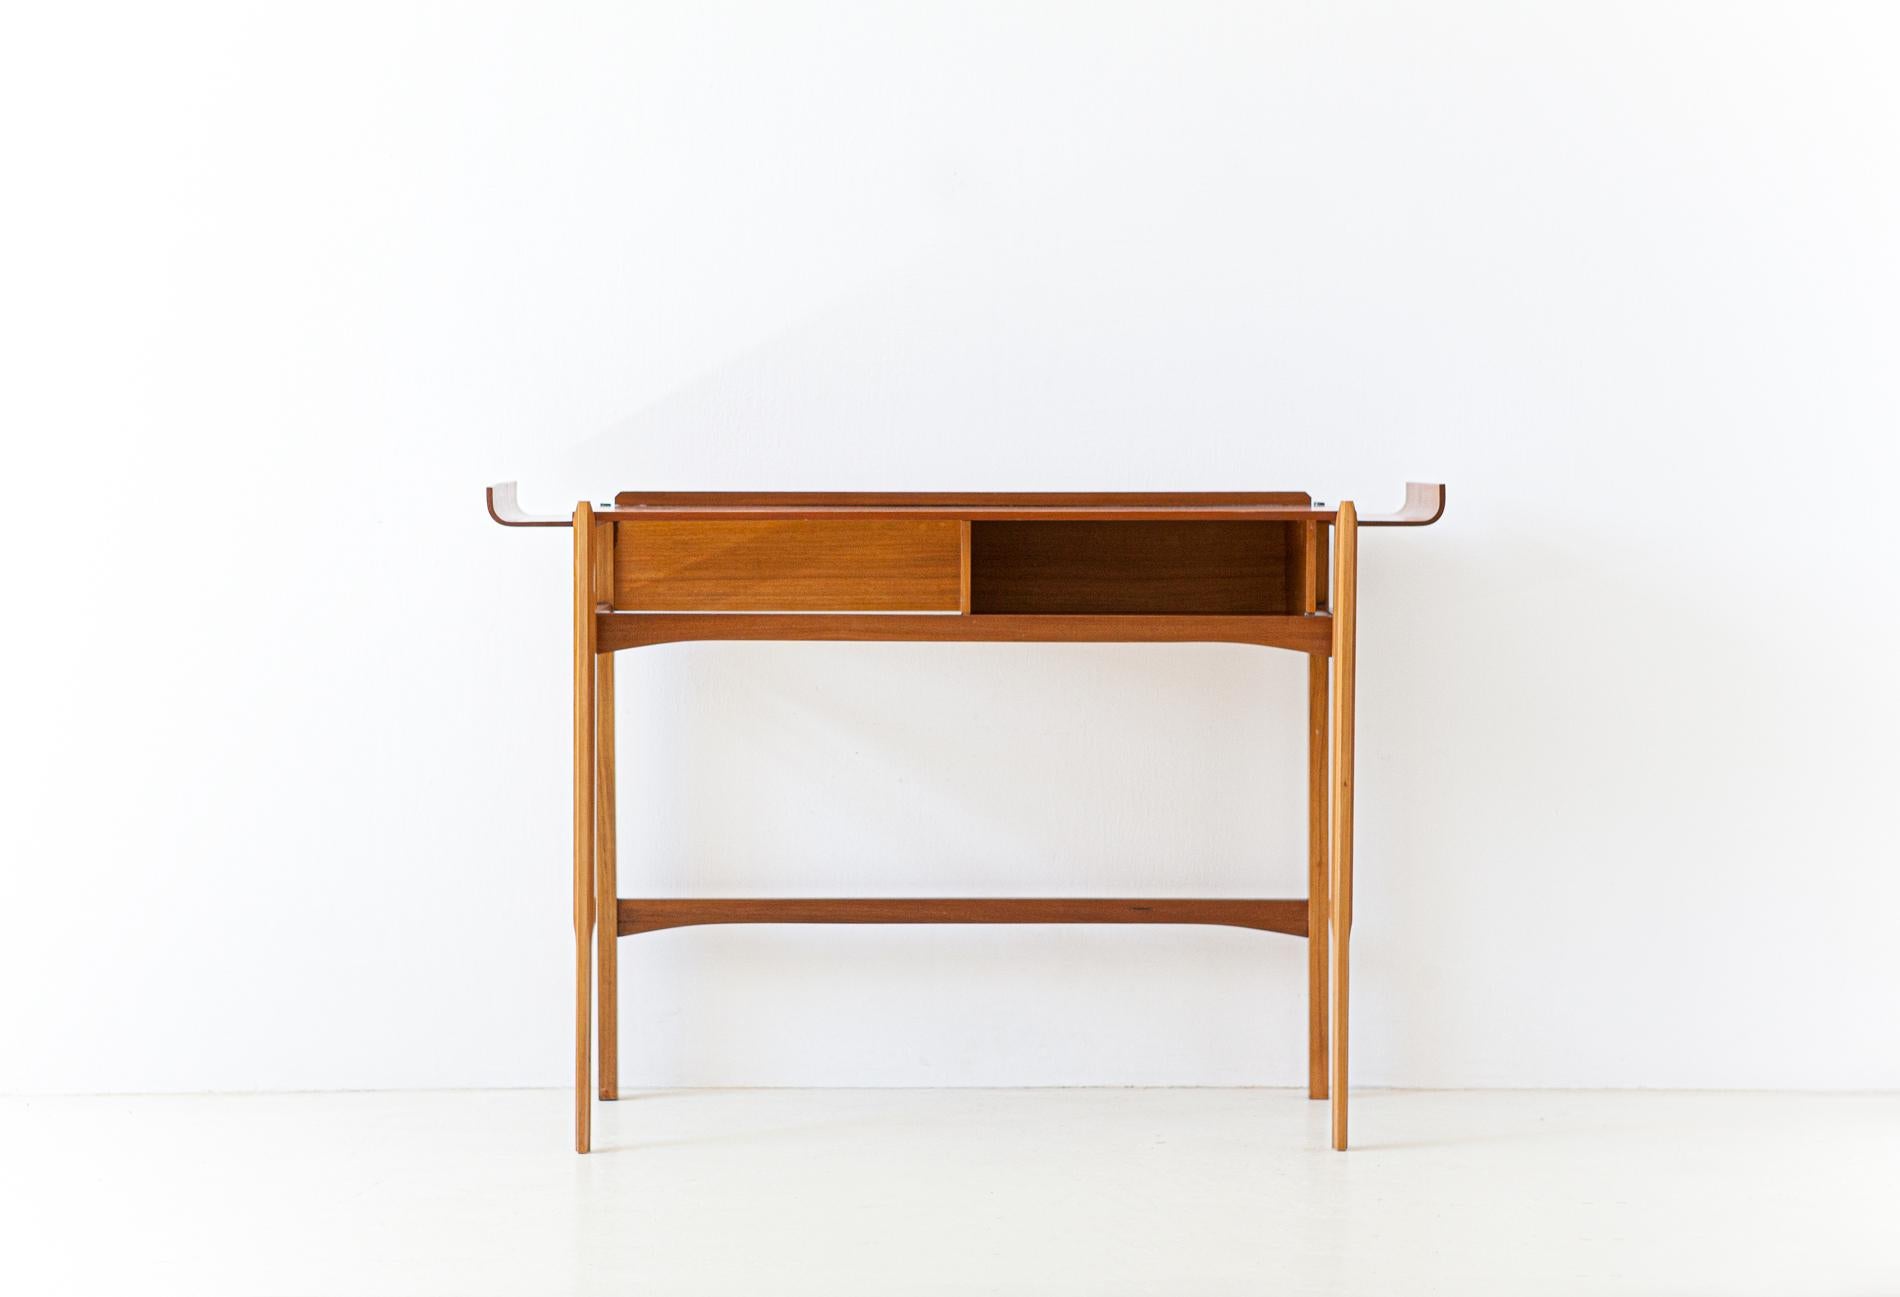 A wooden console, manufactured in Italy during the 1950s.
Teak wood with curved parts, this entry table can also be used as a side table or as a small desk for laptop.
Completely restored.
 